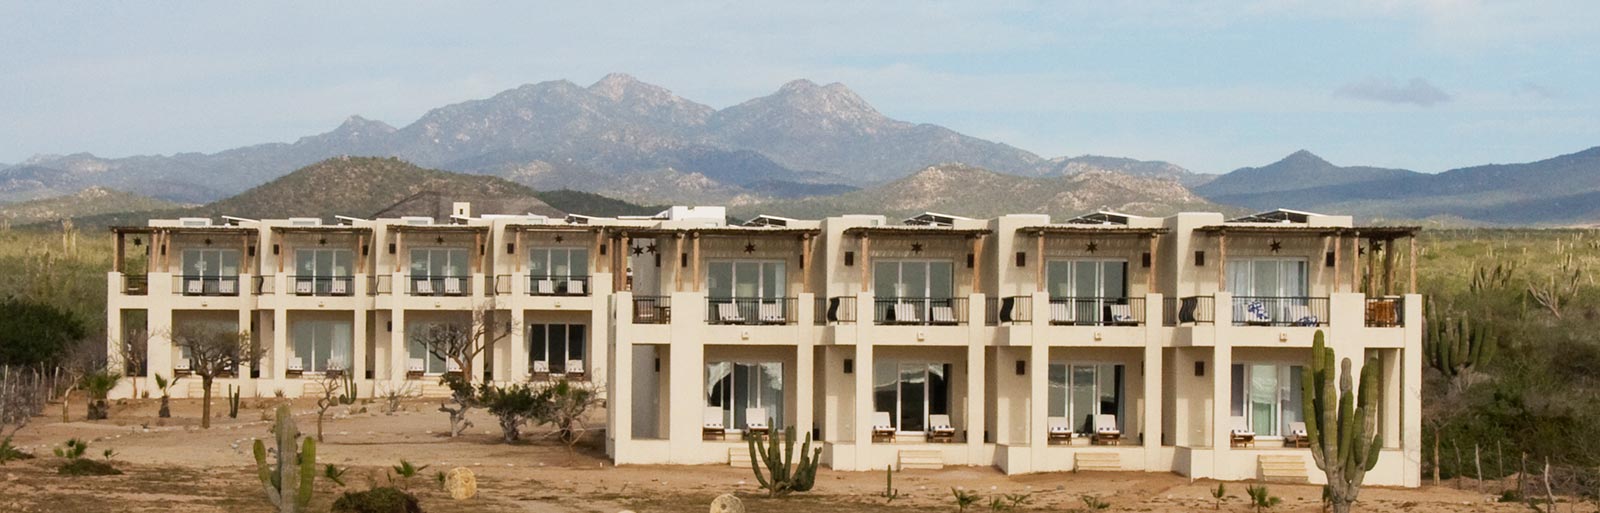 Mexico Yoga Retreat Center: Guest Rooms with Mountain Backdrop